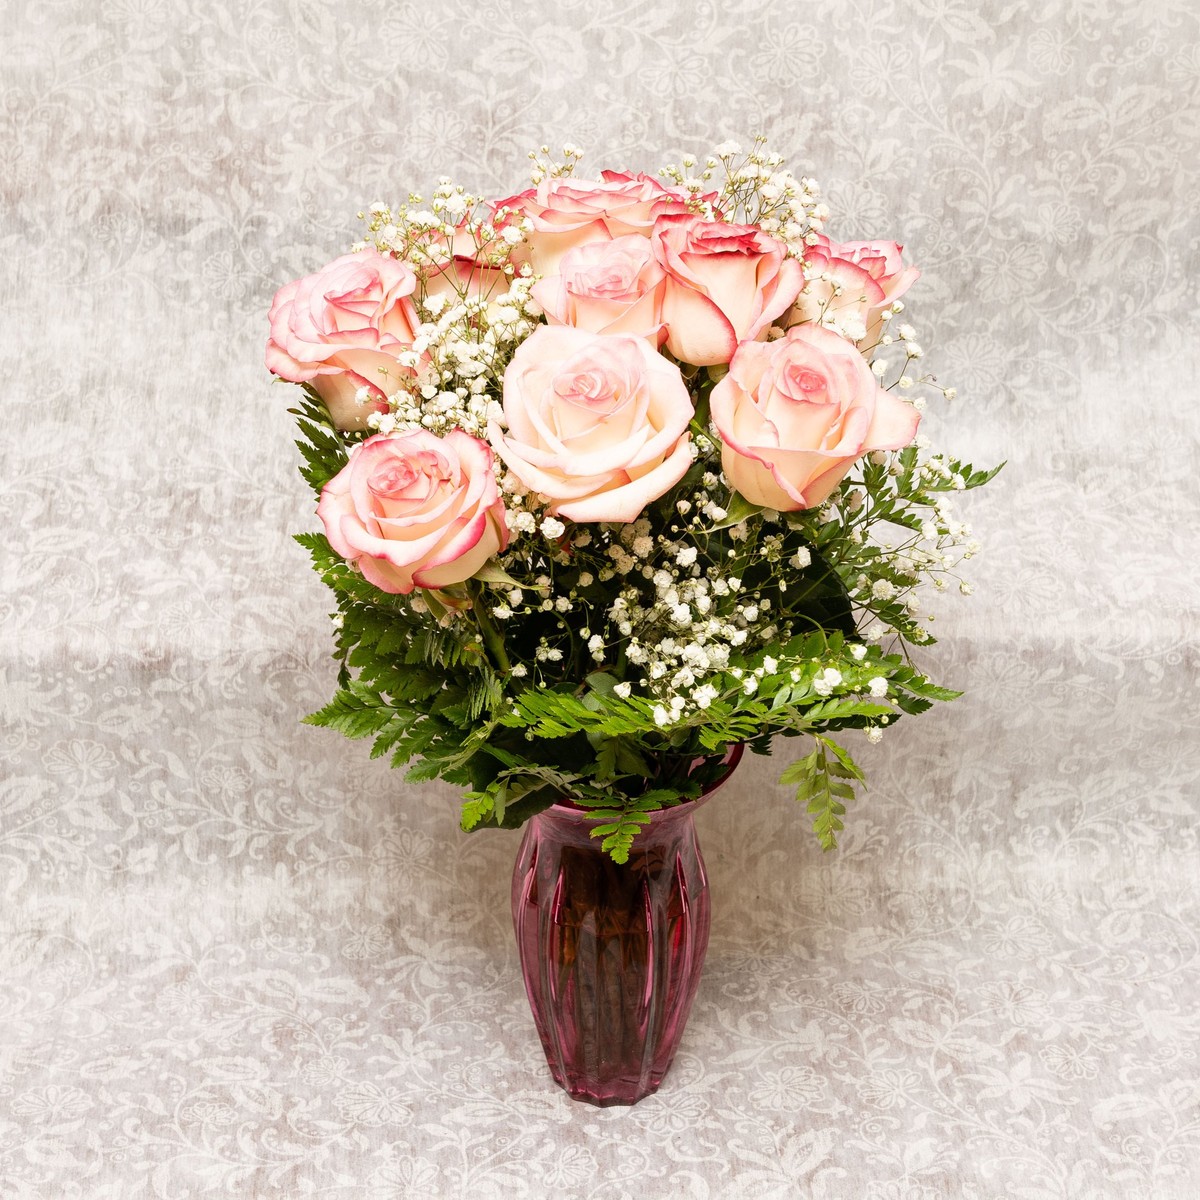 Dundee Florist - Thank You Flowers - Pink Lily Bouquet S22-4298